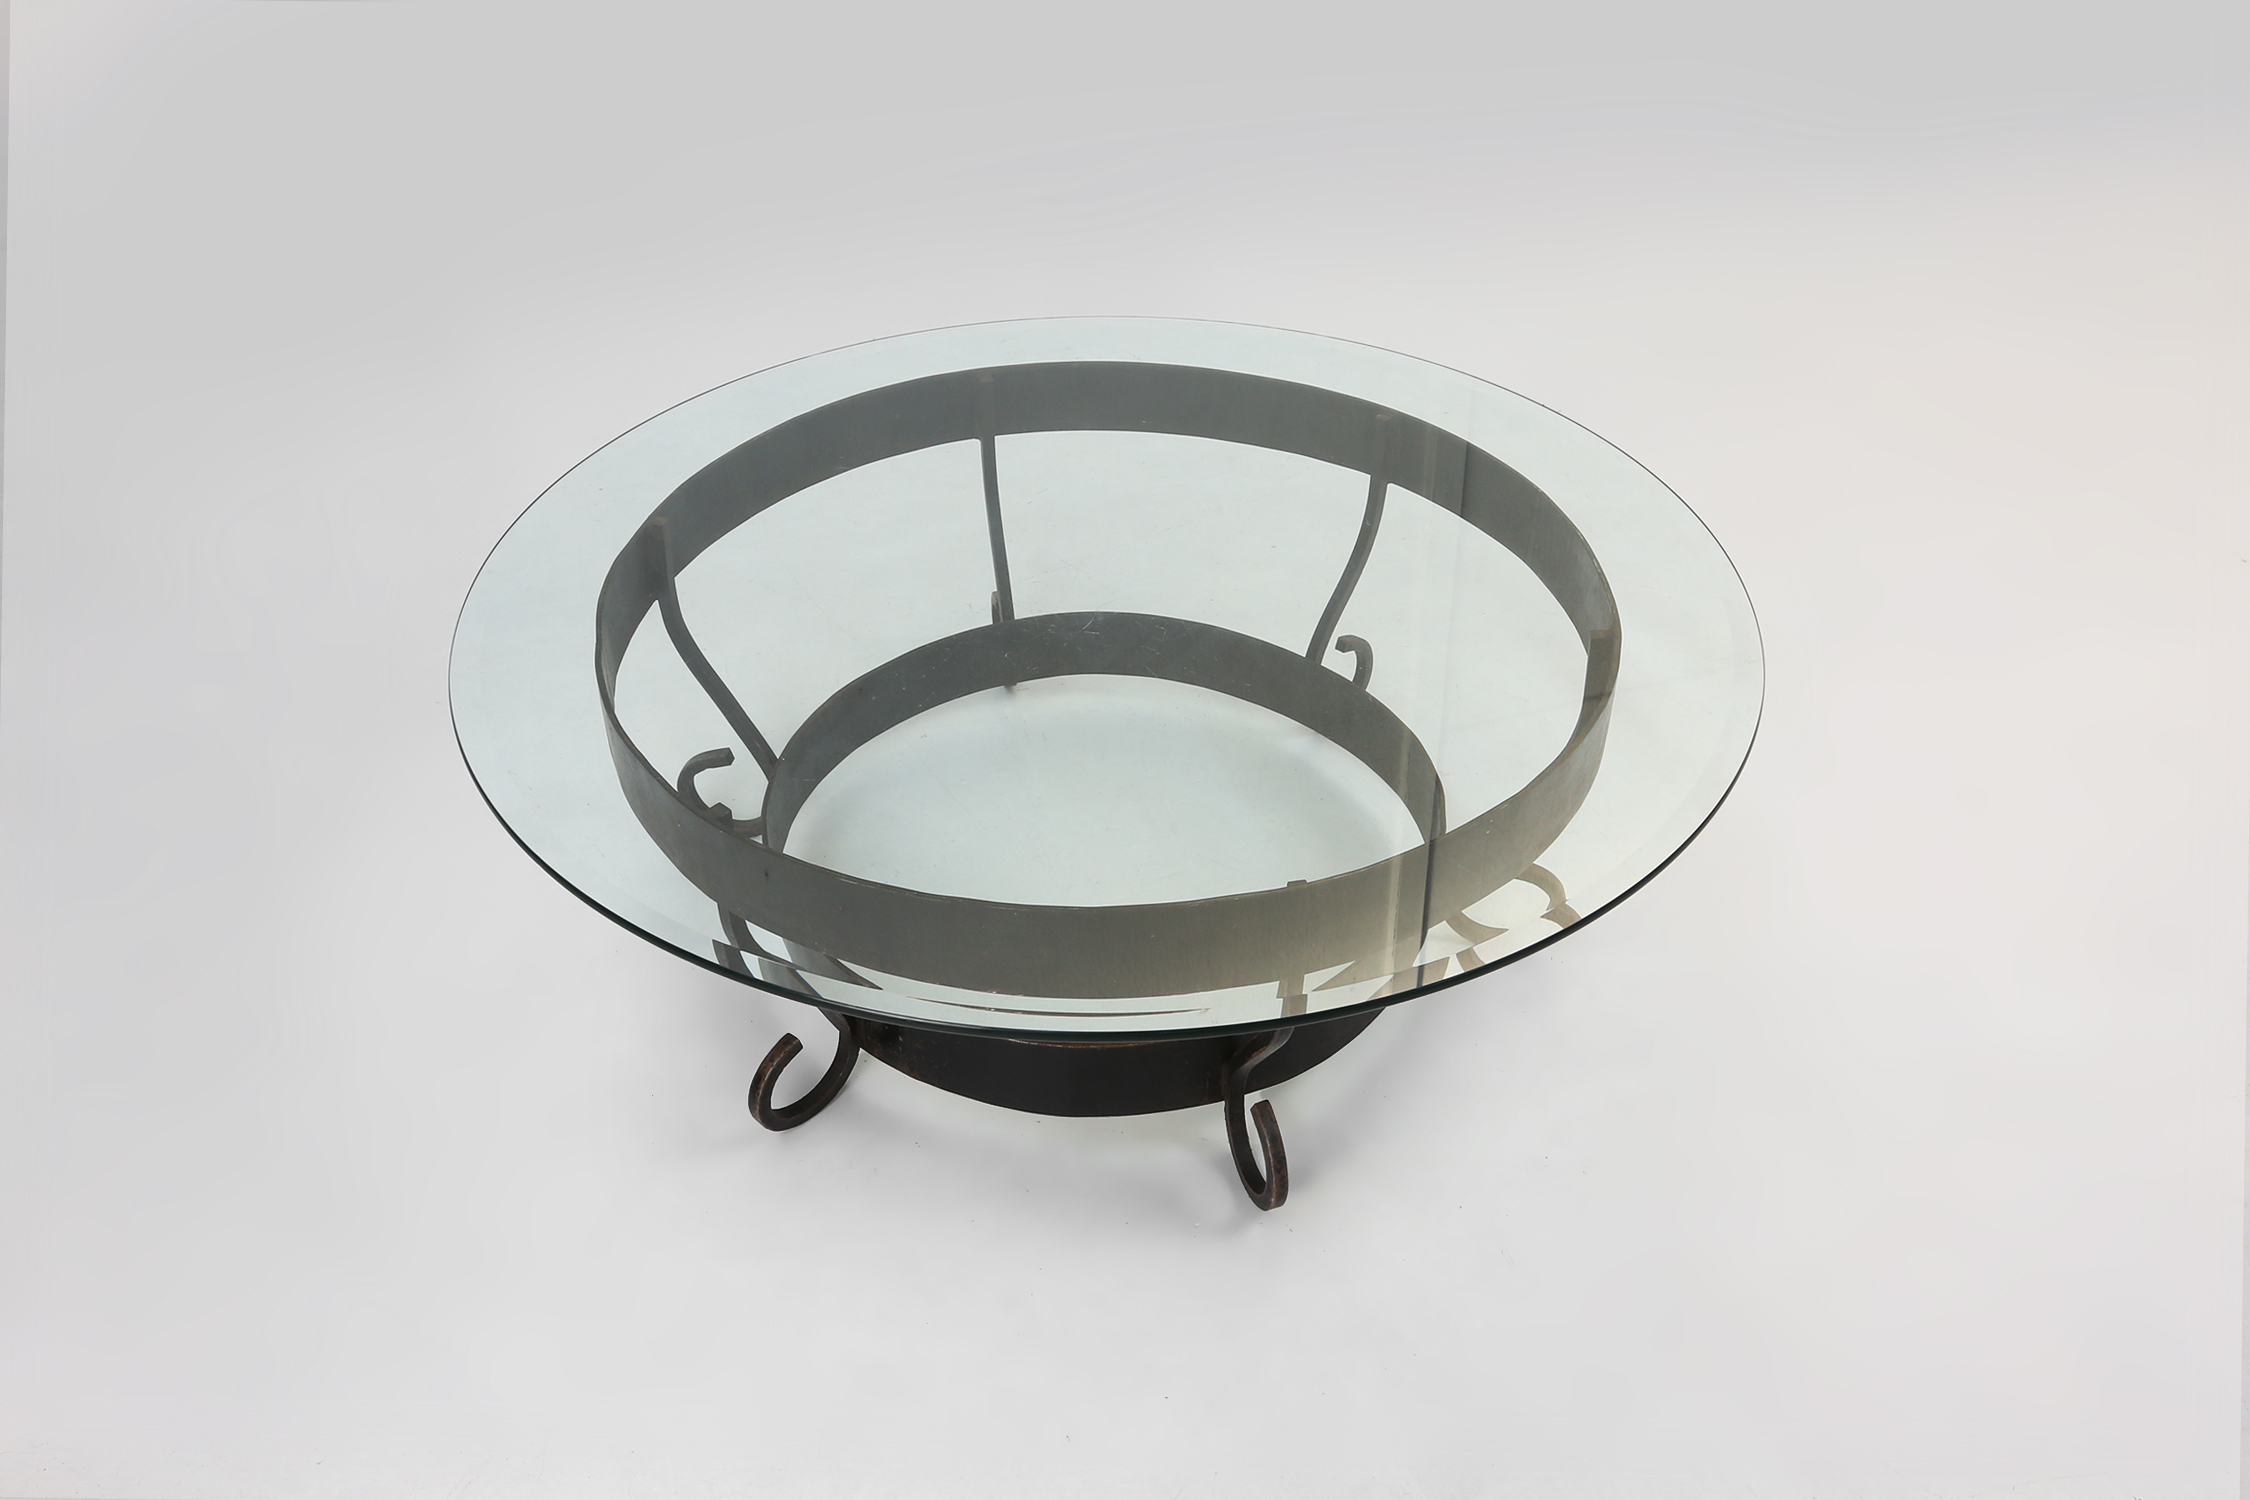 Rustic Round Coffee Table with Wrought Iron Base and Glass Top, France, 1930sthumbnail